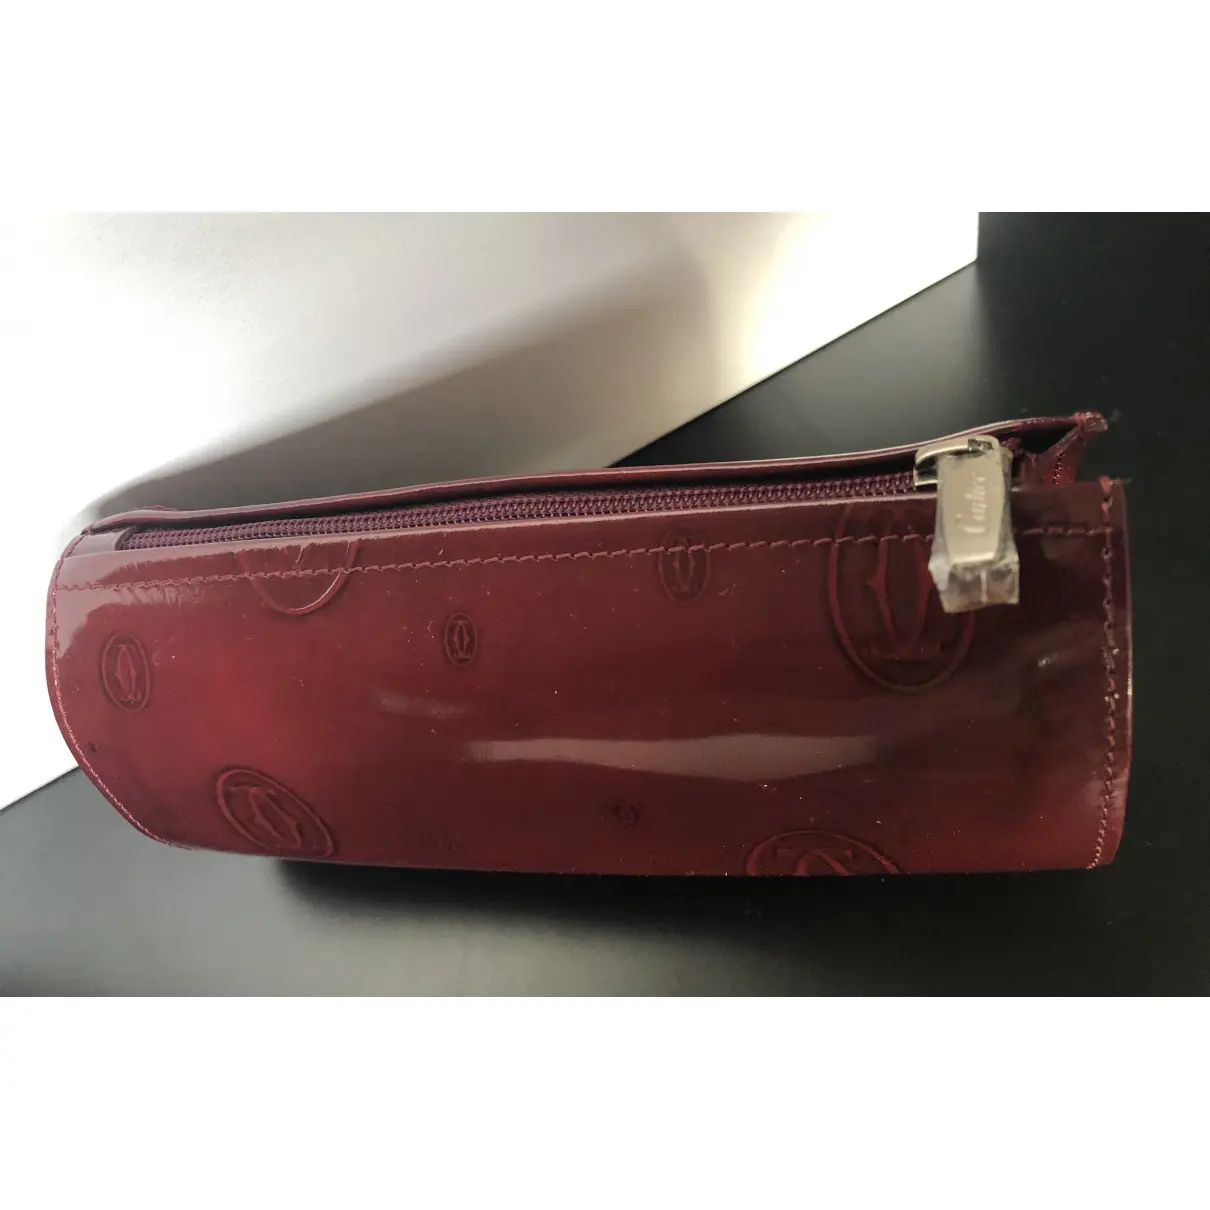 Patent leather travel bag Cartier